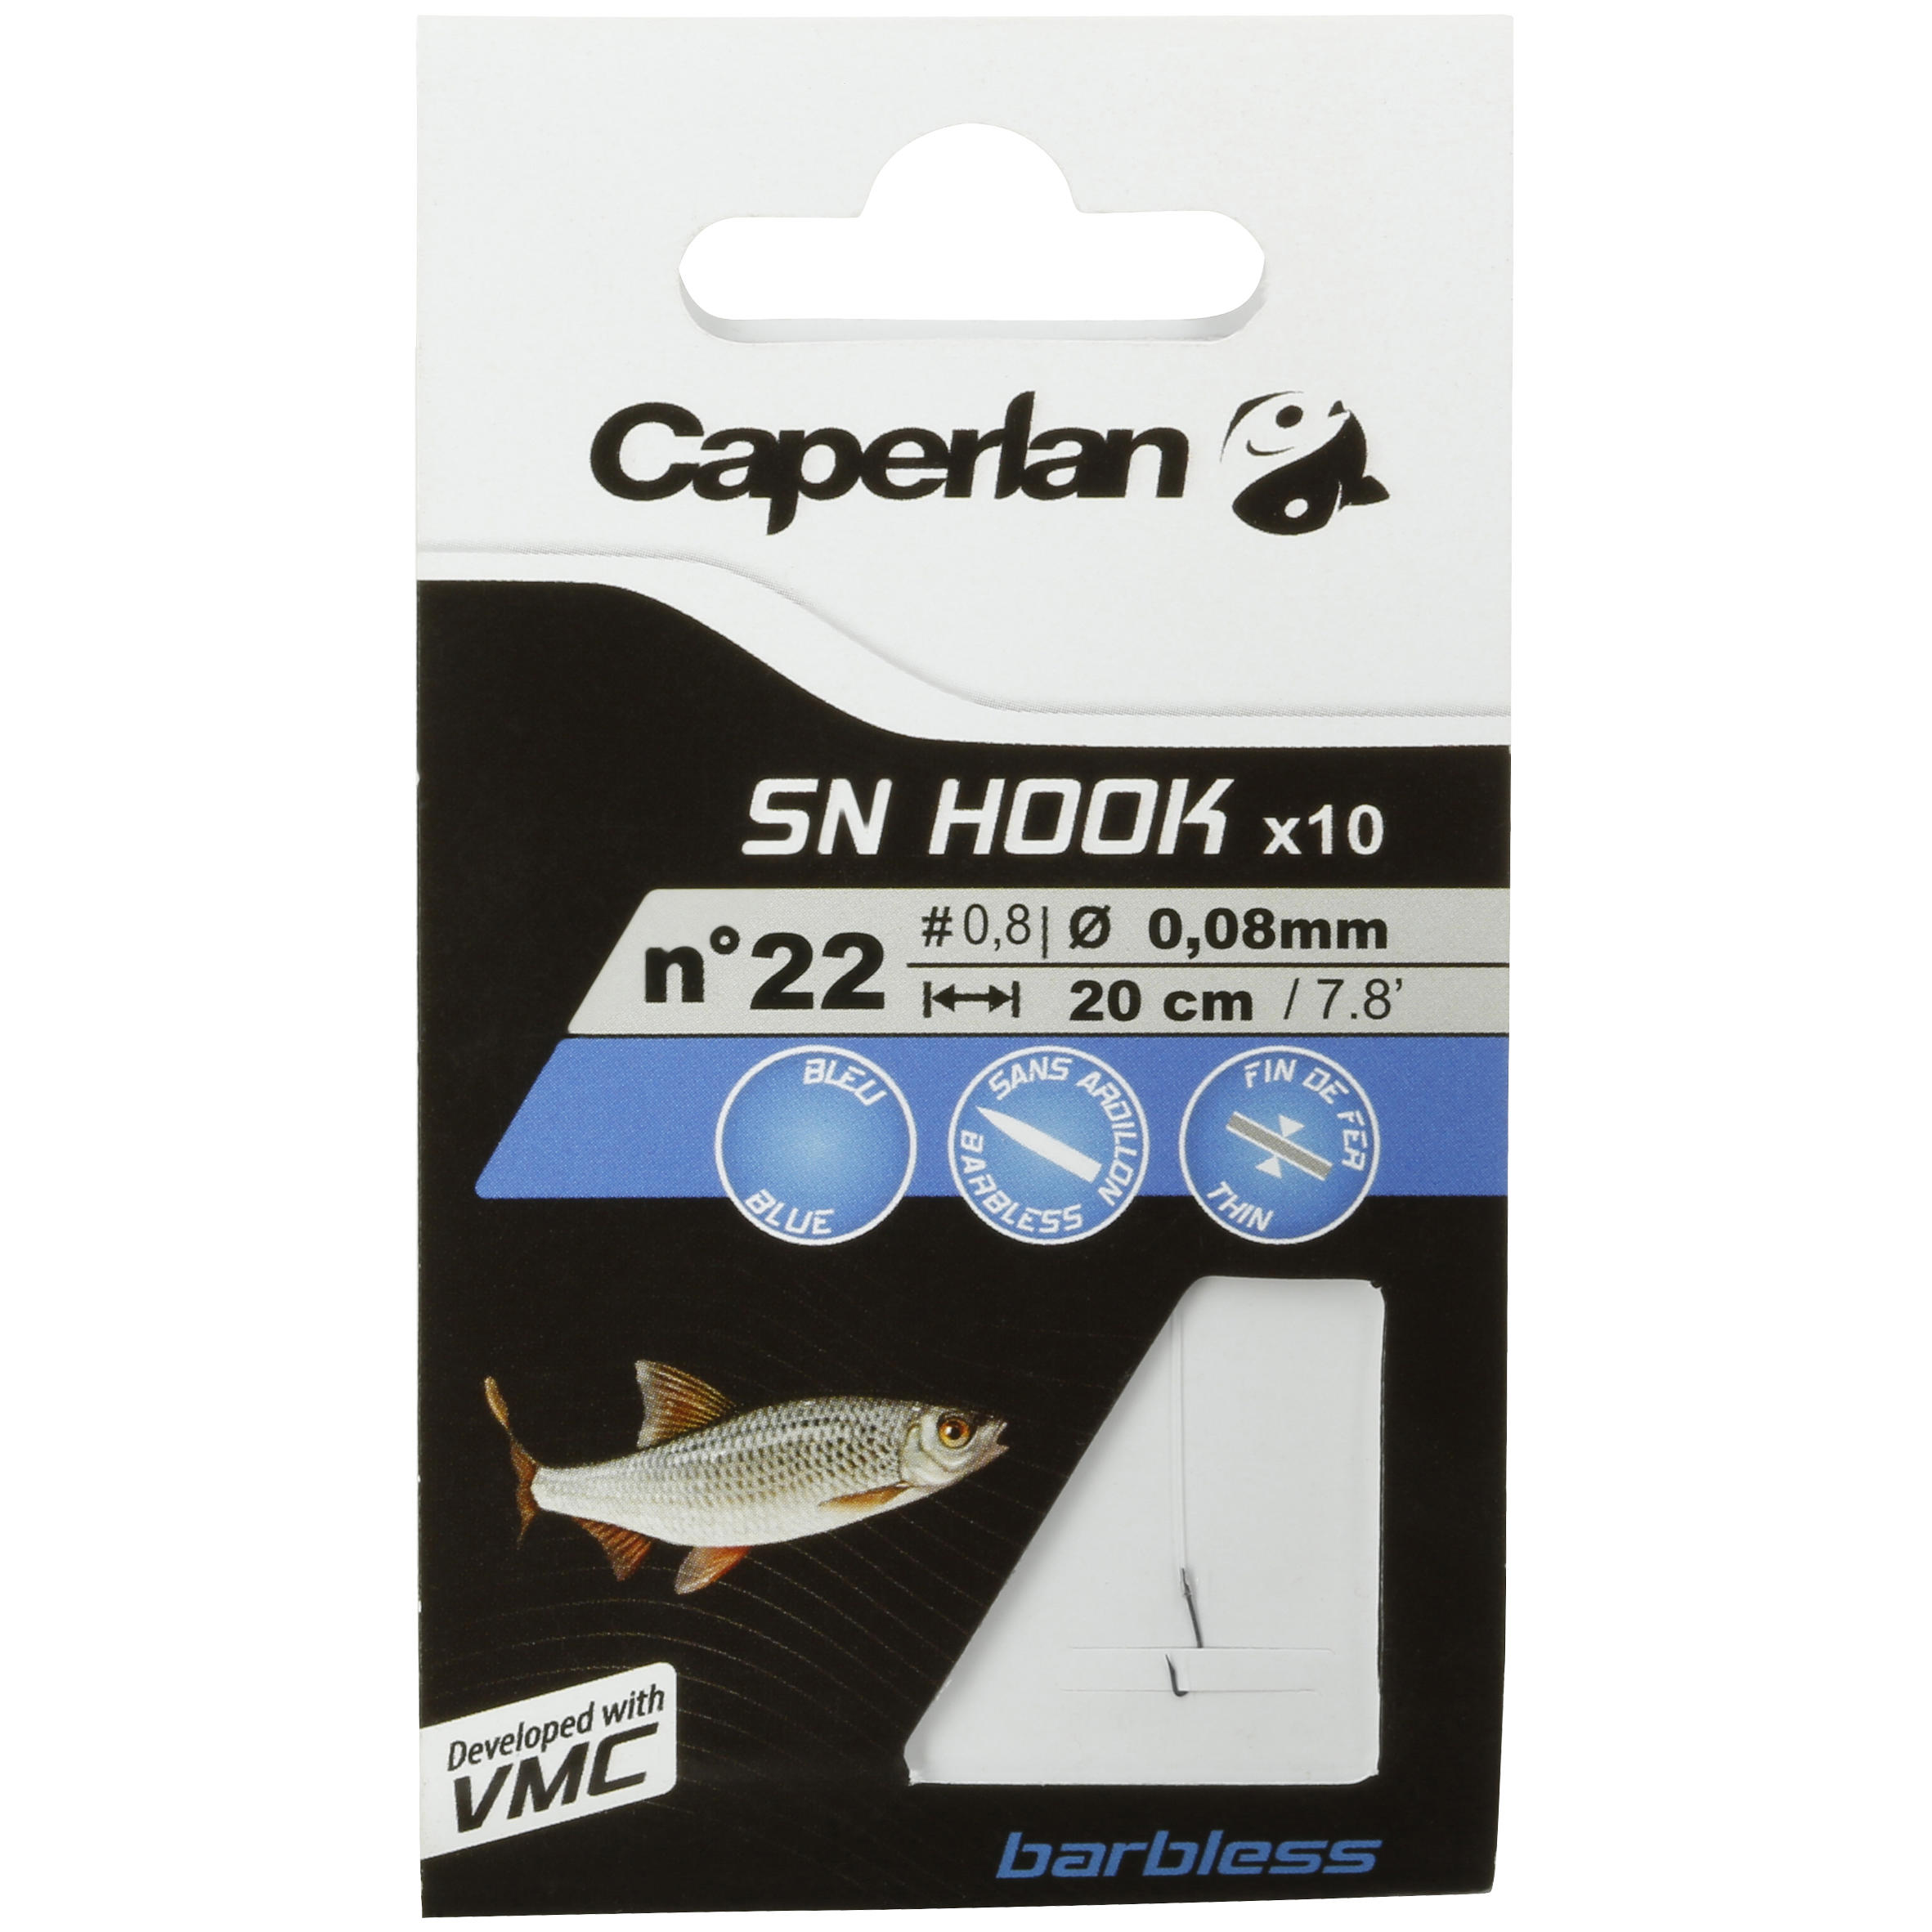 SN Hook Barbless Fishing Rigged Hooks 9/14